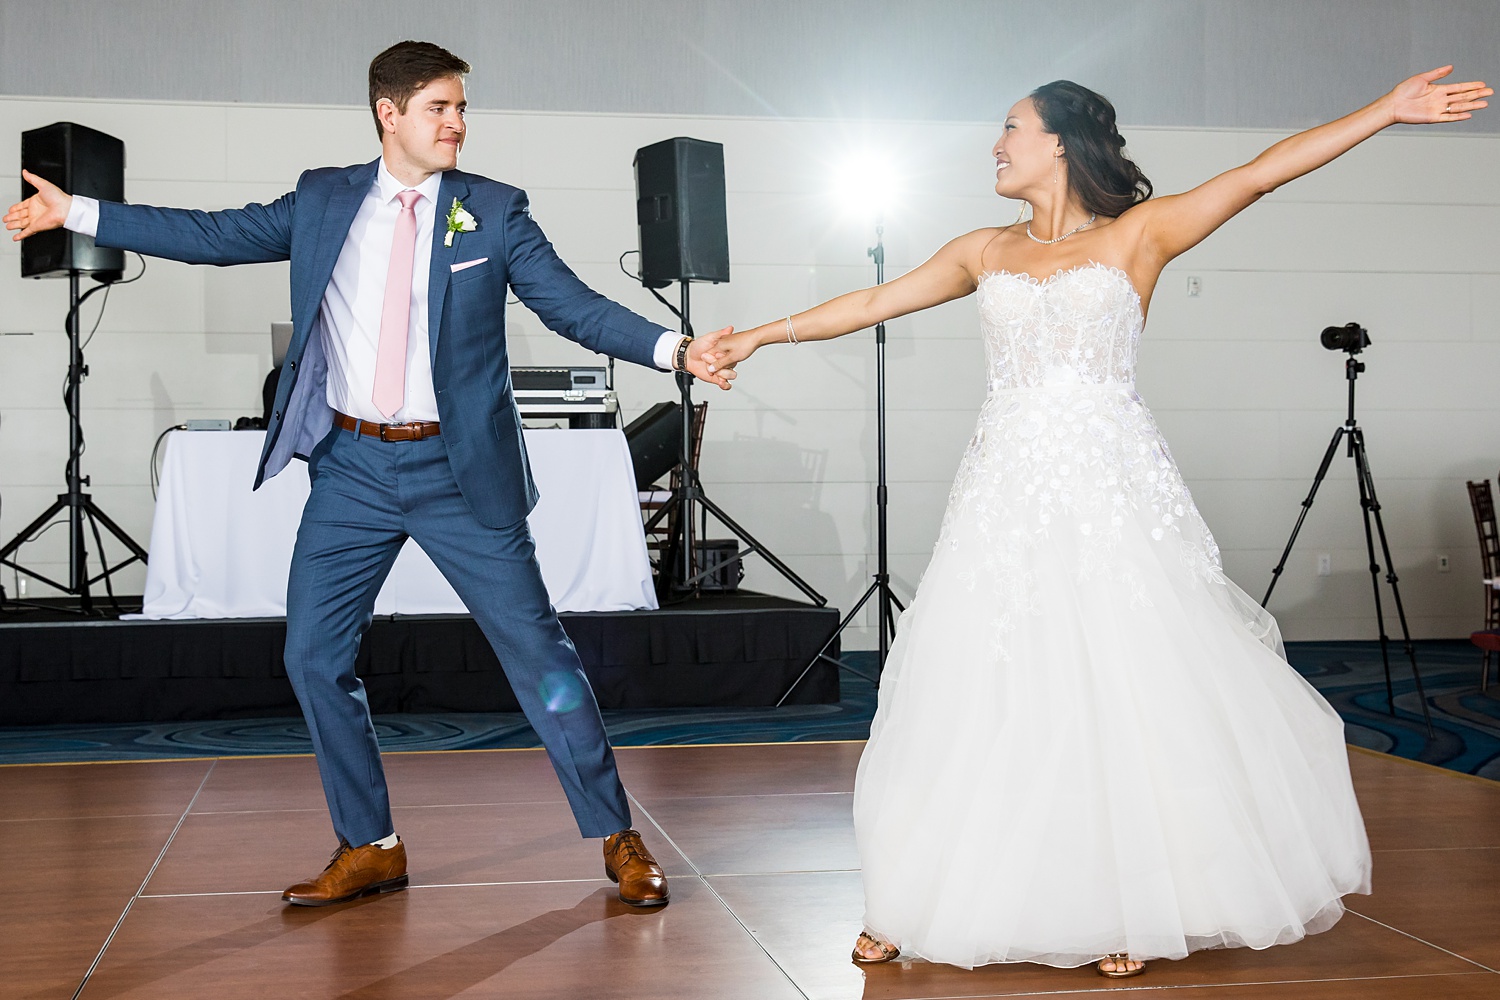 A grand first dance by the couple on their wedding day in Maine